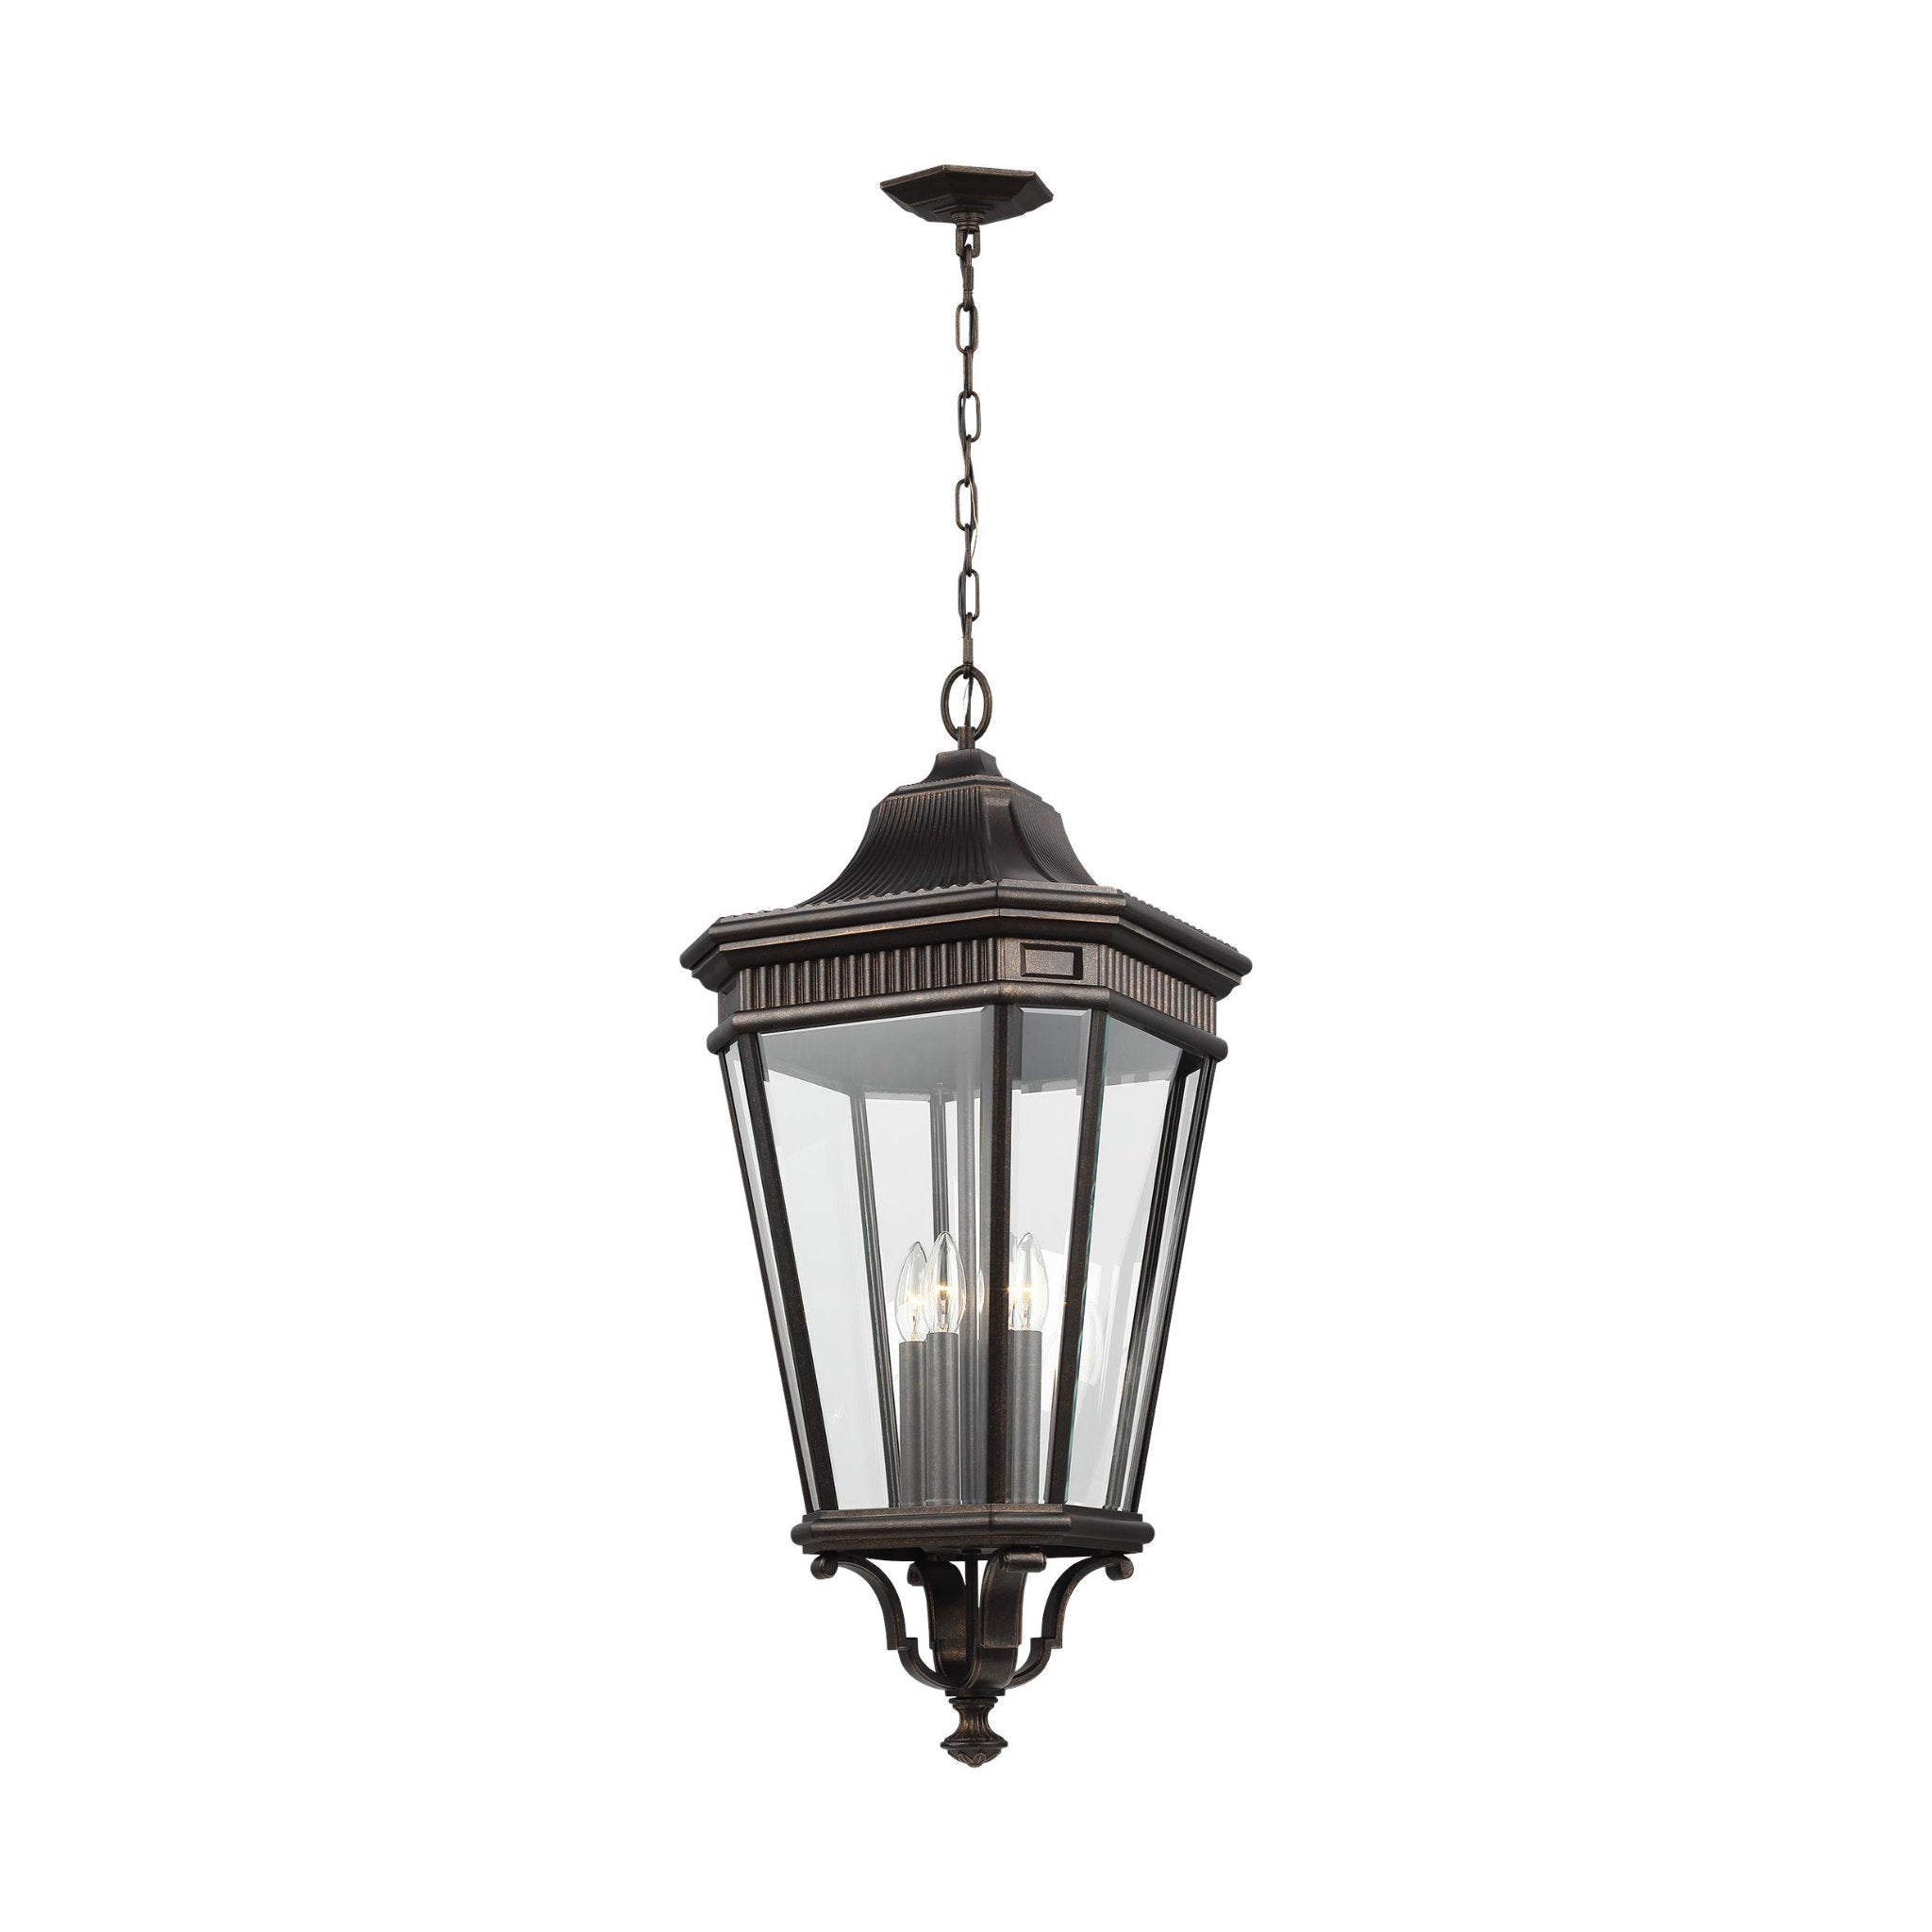 Cotswold Lane Large Pendant Traditional Outdoor Fixture 13.625" Width 31" Height Aluminum Irregular Clear Beveled Shade in Grecian Bronze